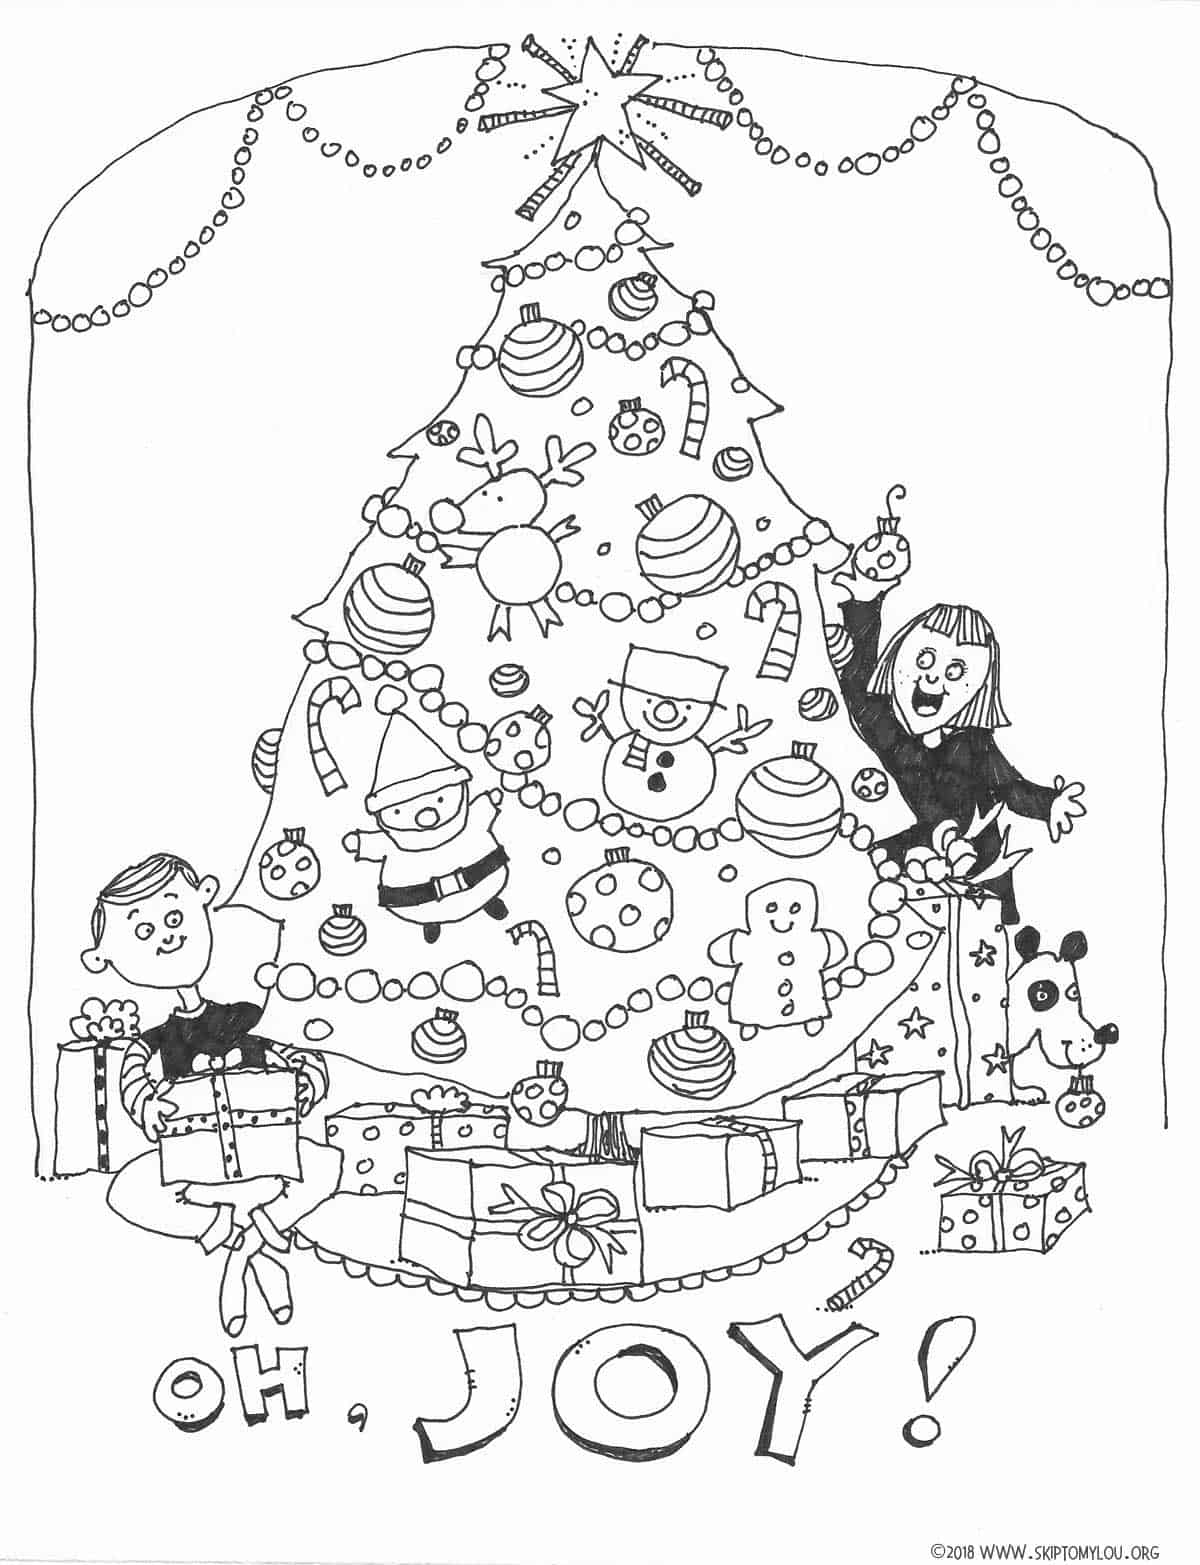 Free christmas tree coloring pages for festive fun skip to my lou